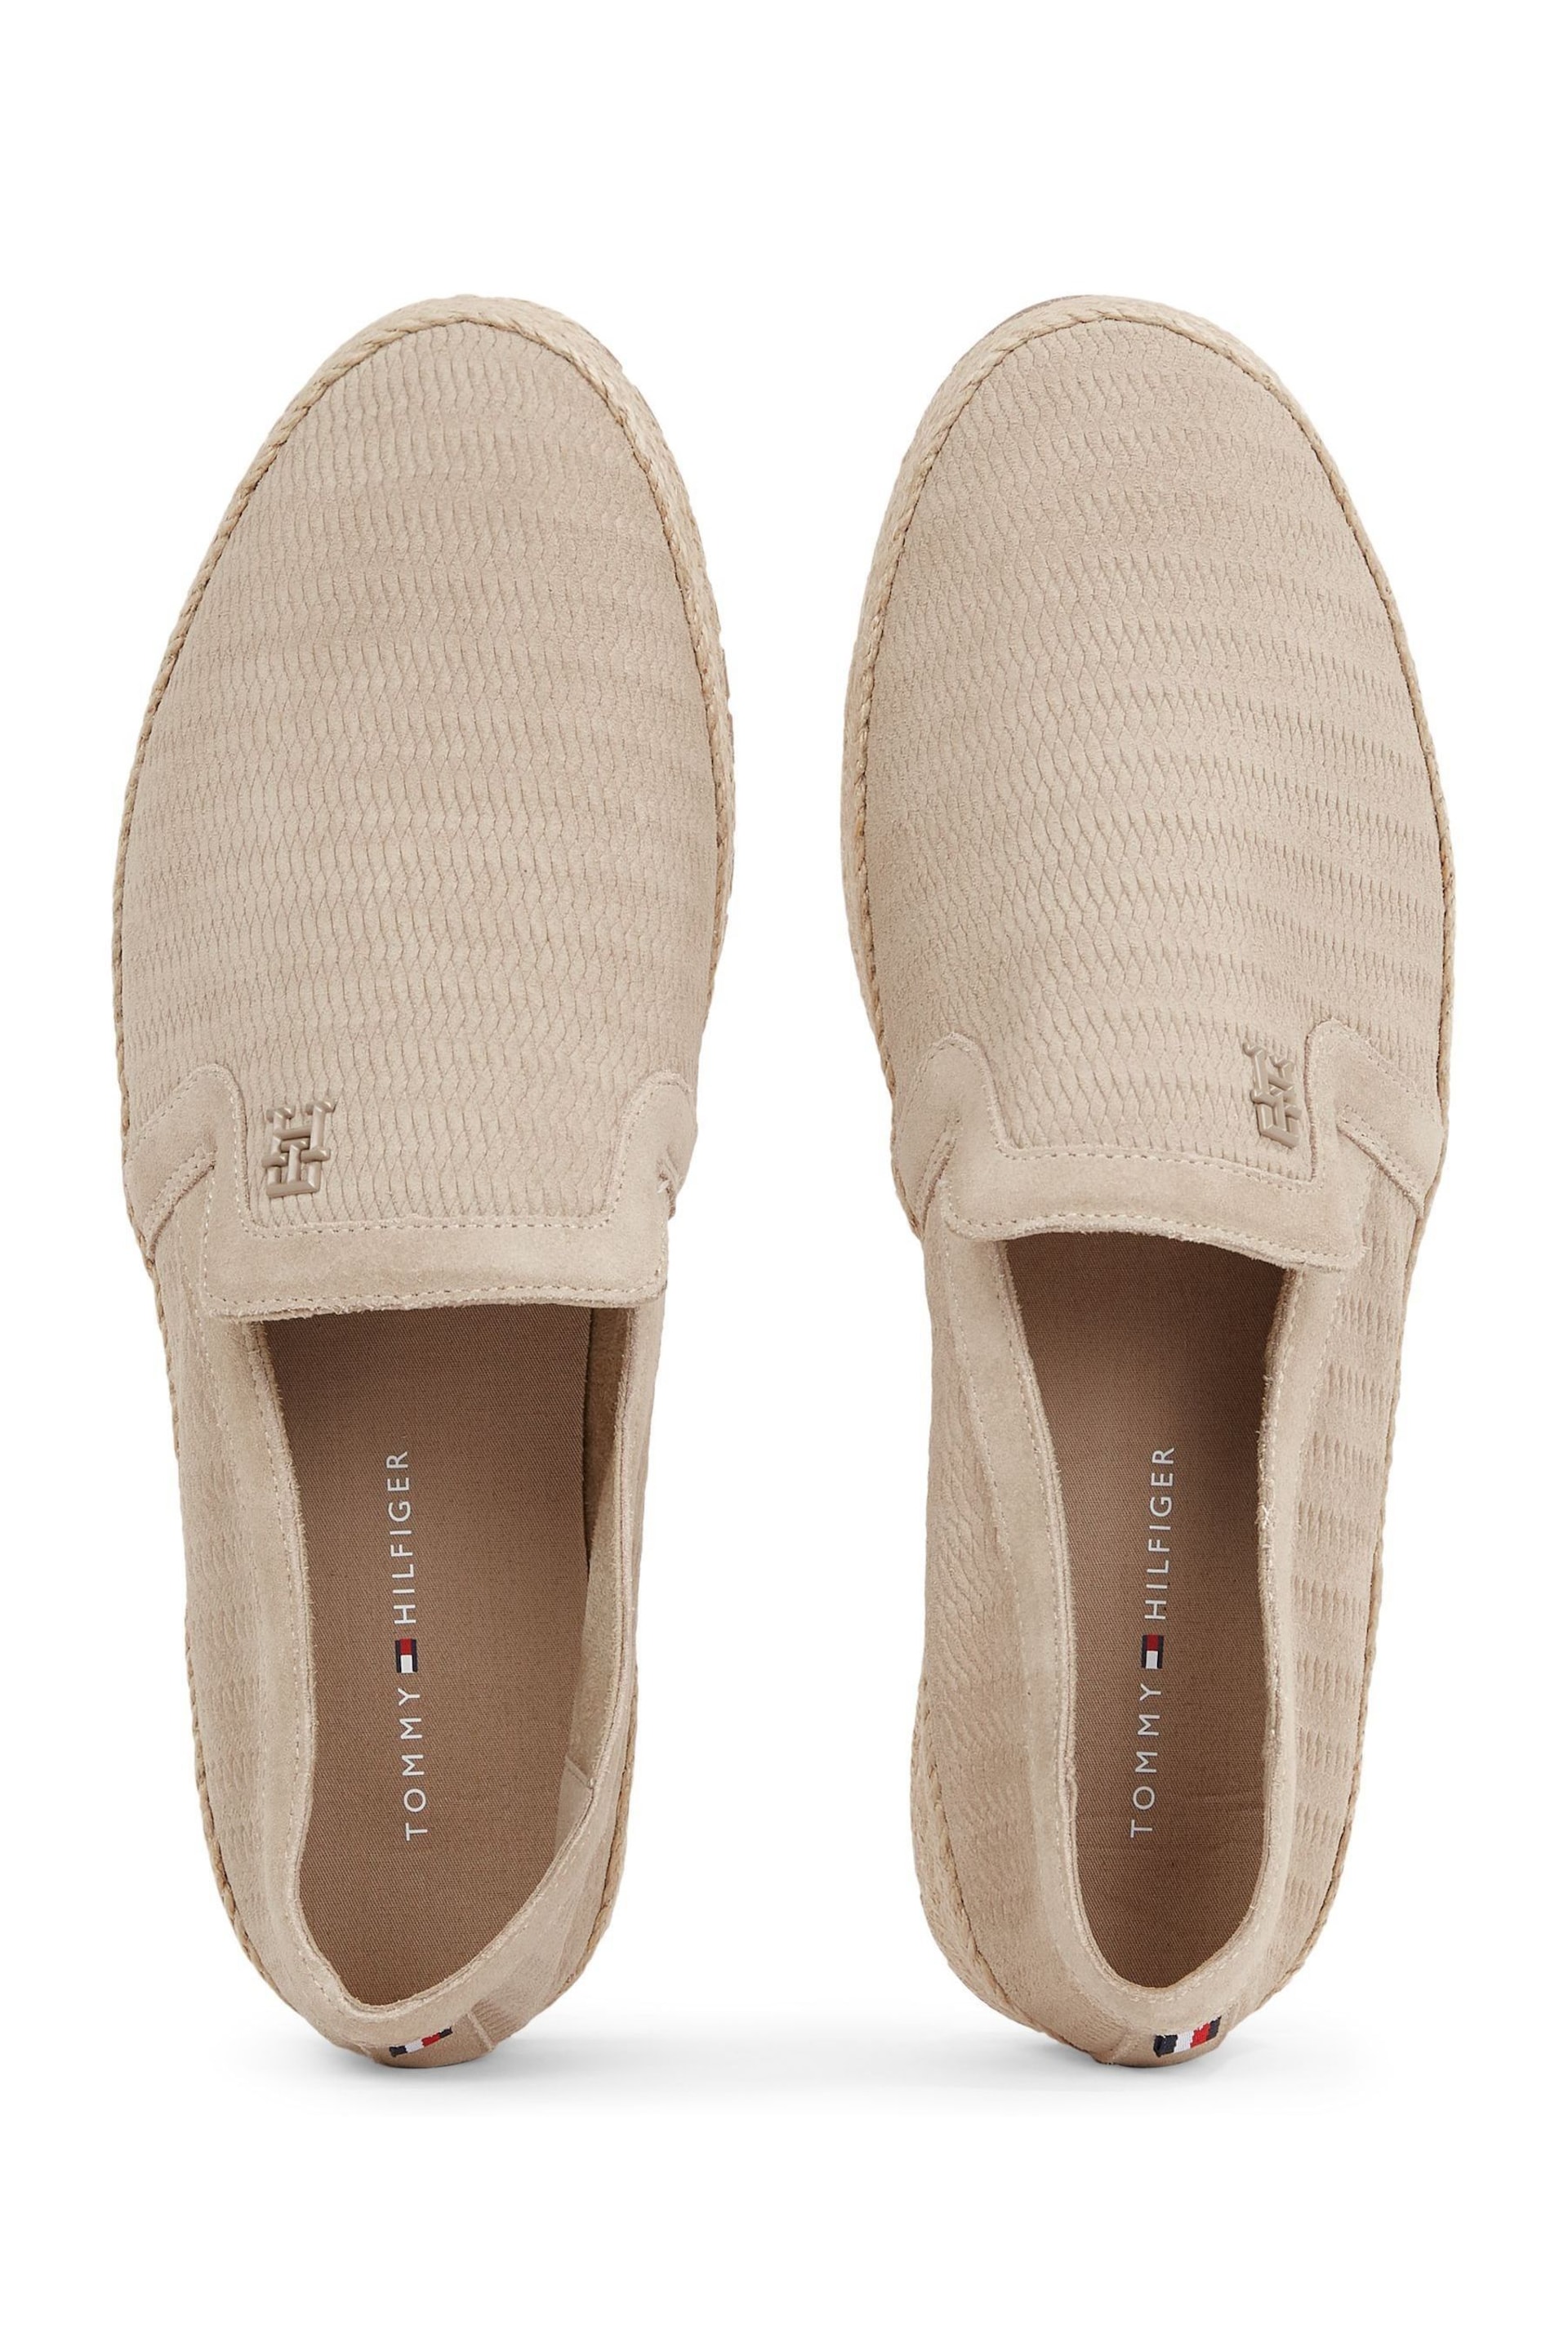 Tommy Hilfiger Classic Suede Esapdrilles - Image 3 of 4